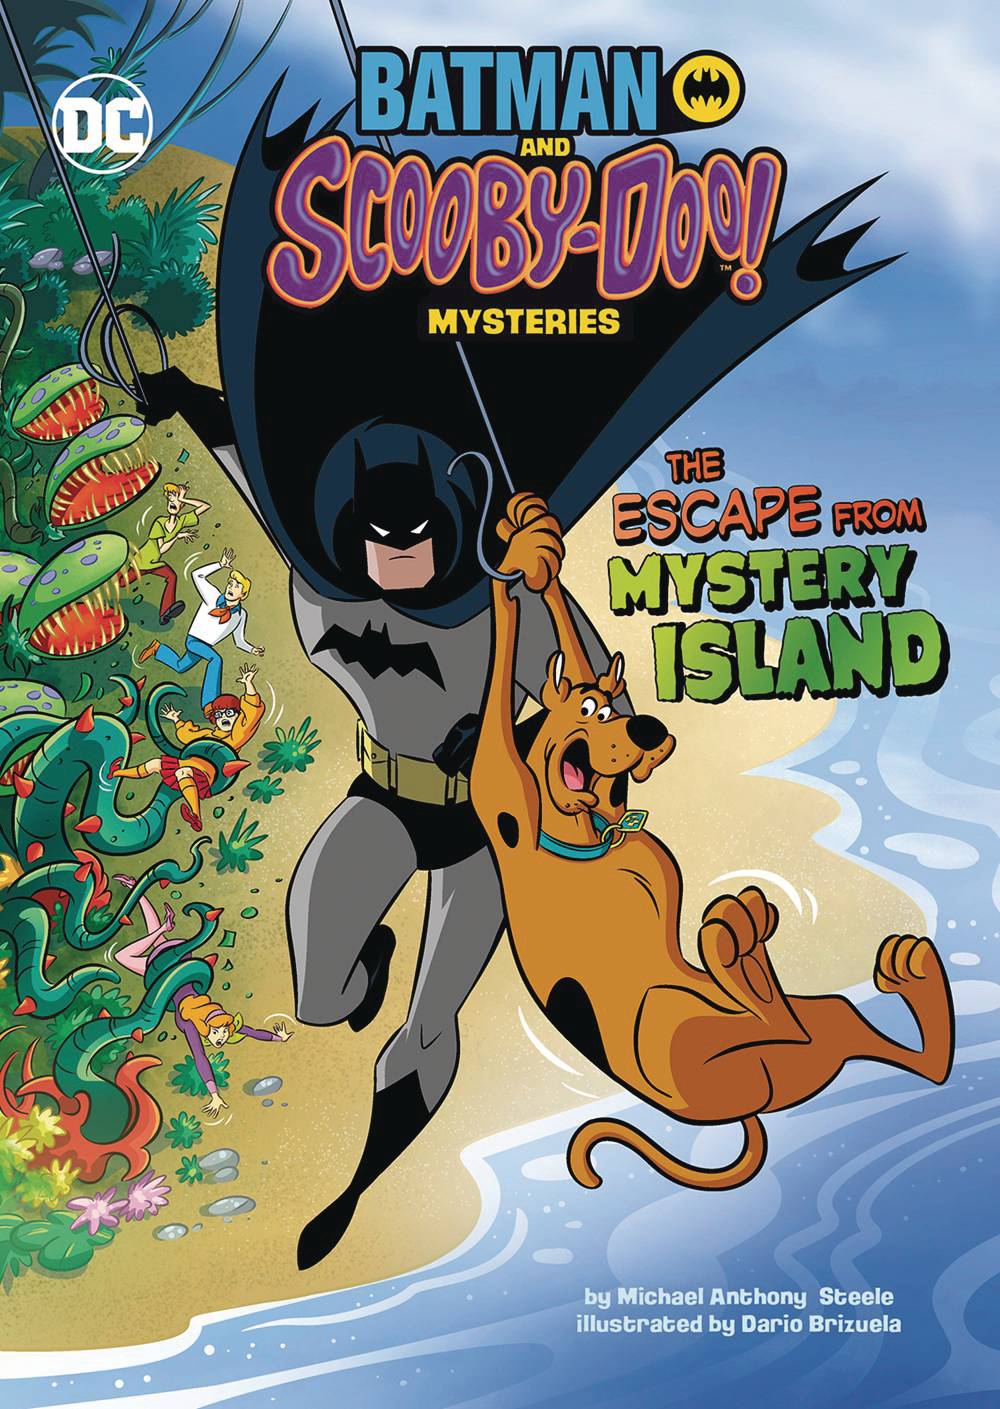 BATMAN SCOOBY DOO MYSTERIES ESCAPE FROM MYSTERY ISLAND (C: 0